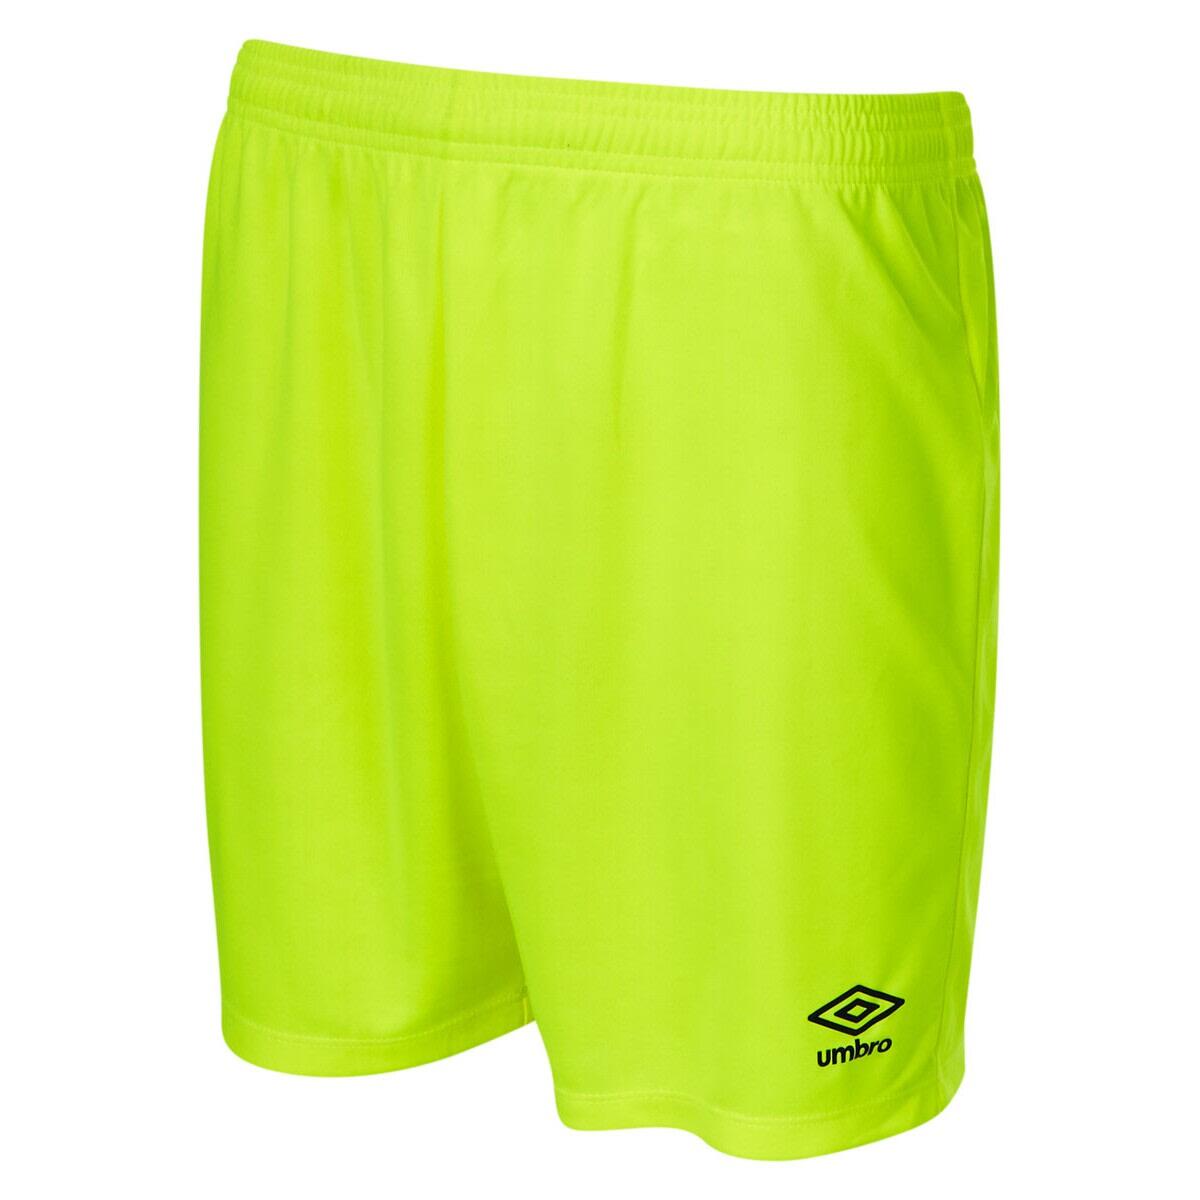 UMBRO Childrens/Kids Club II Shorts (Safety Yellow/Carbon)